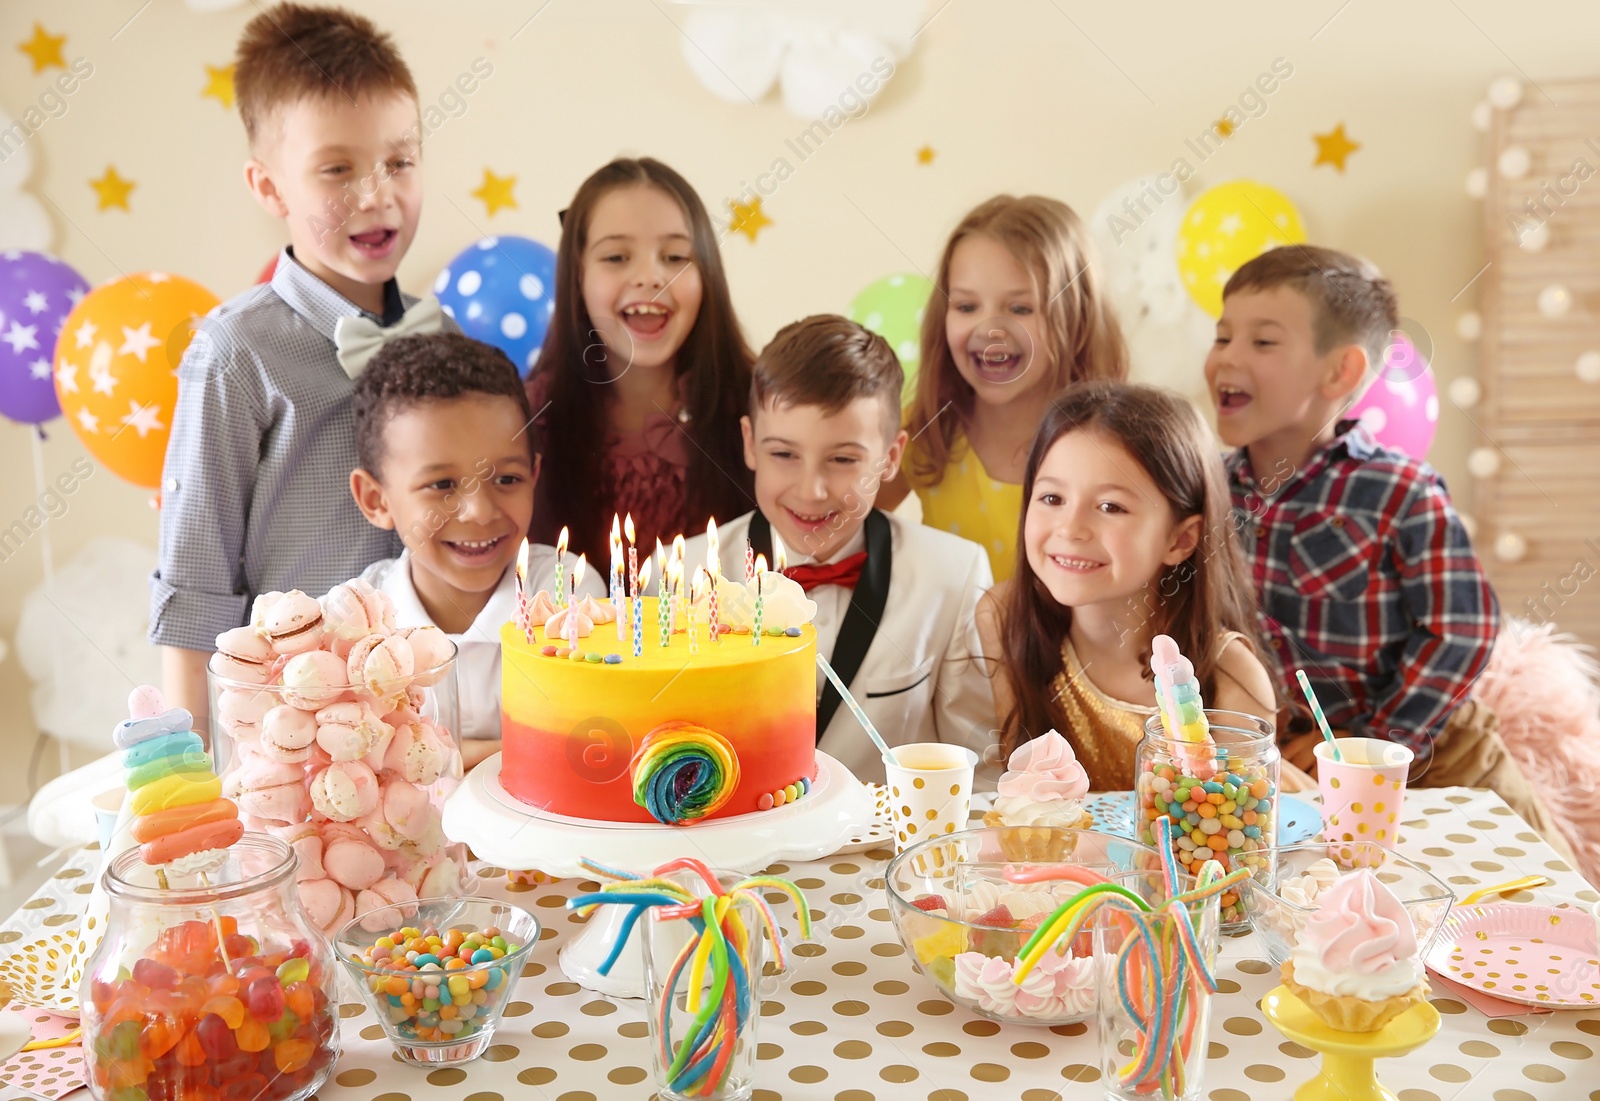 Photo of Cute children celebrating birthday at table indoors